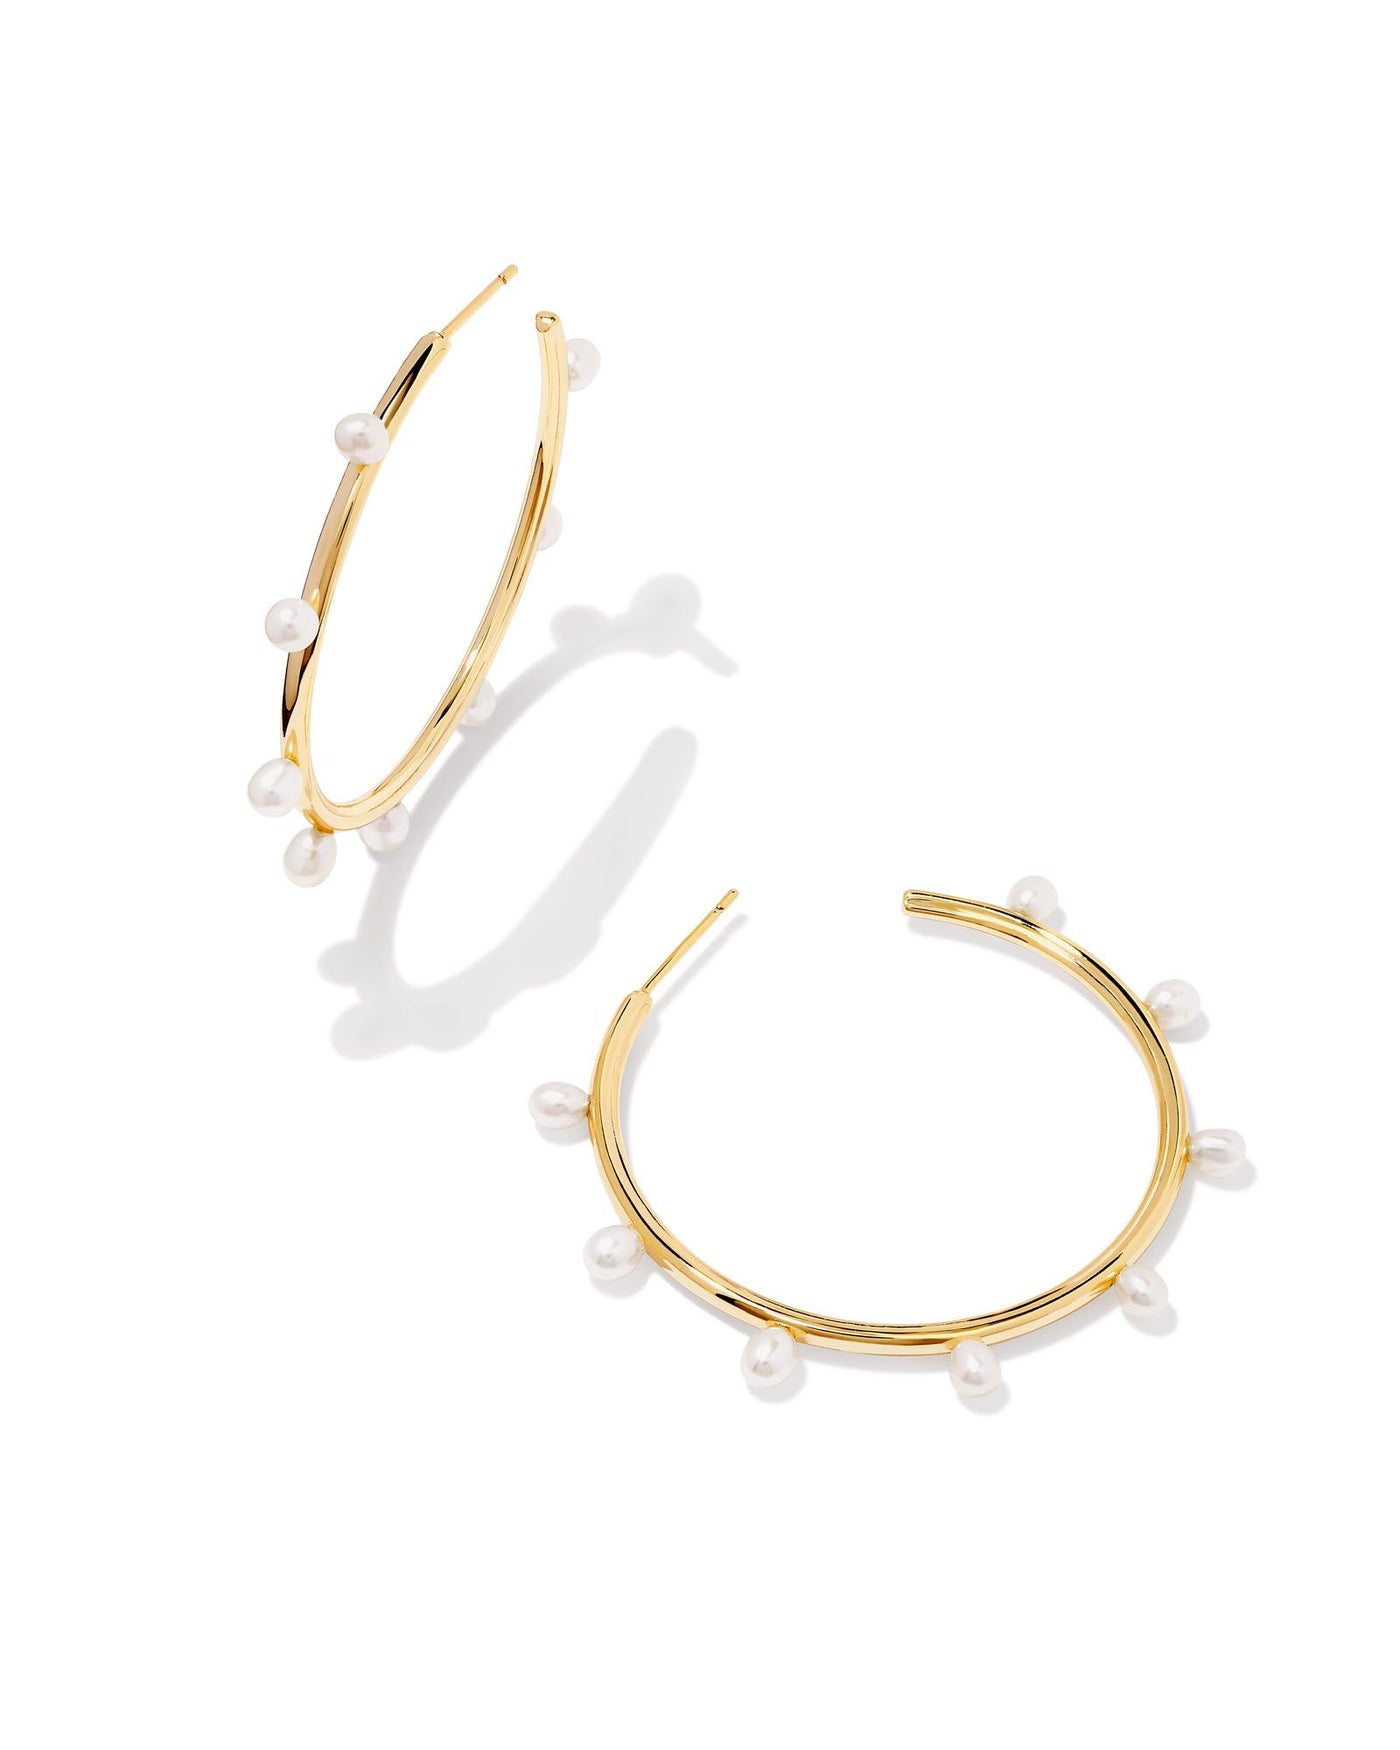 Kendra Scott Leighton Pearl Hoop Earrings Gold White Pearl-Earrings-Kendra Scott-Market Street Nest, Fashionable Clothing, Shoes and Home Décor Located in Mabank, TX